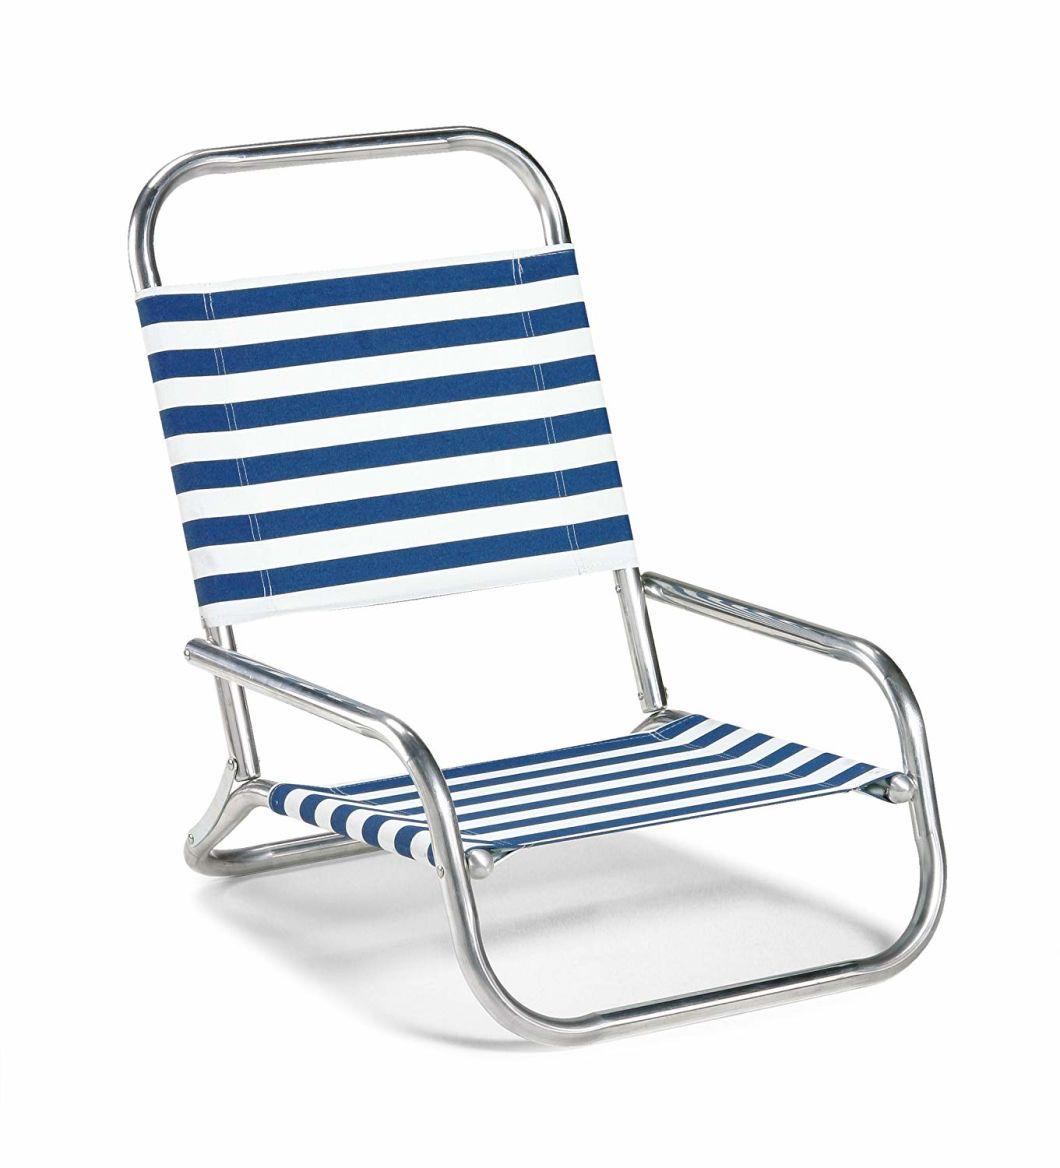 High Quality Lower Seat Beach Chair Metal Frame Folding Chair for Beach or Camping Two Folds Aluminum Frame Chair